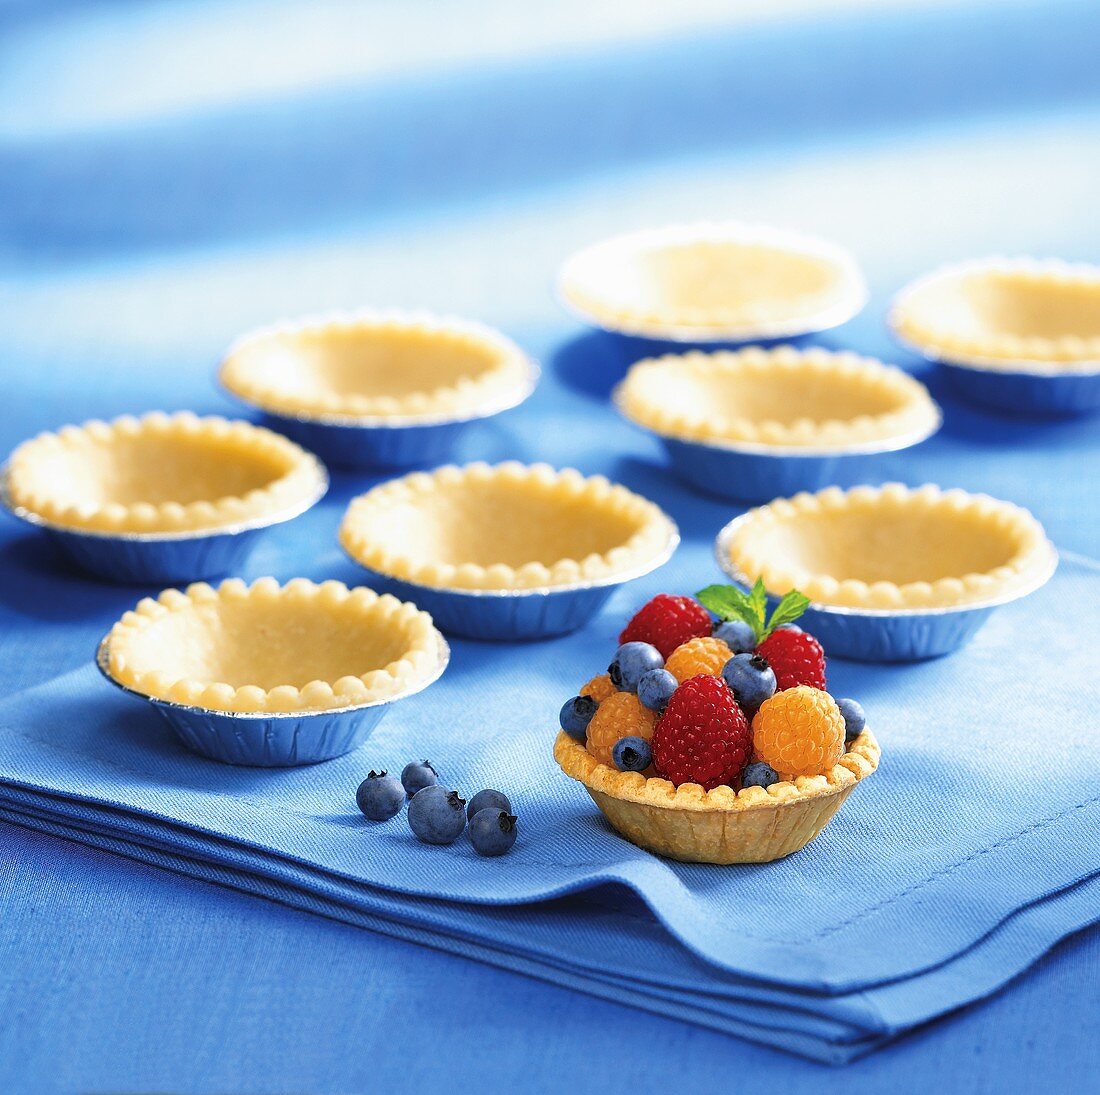 Shortcrust pastry cases, one filled with berries